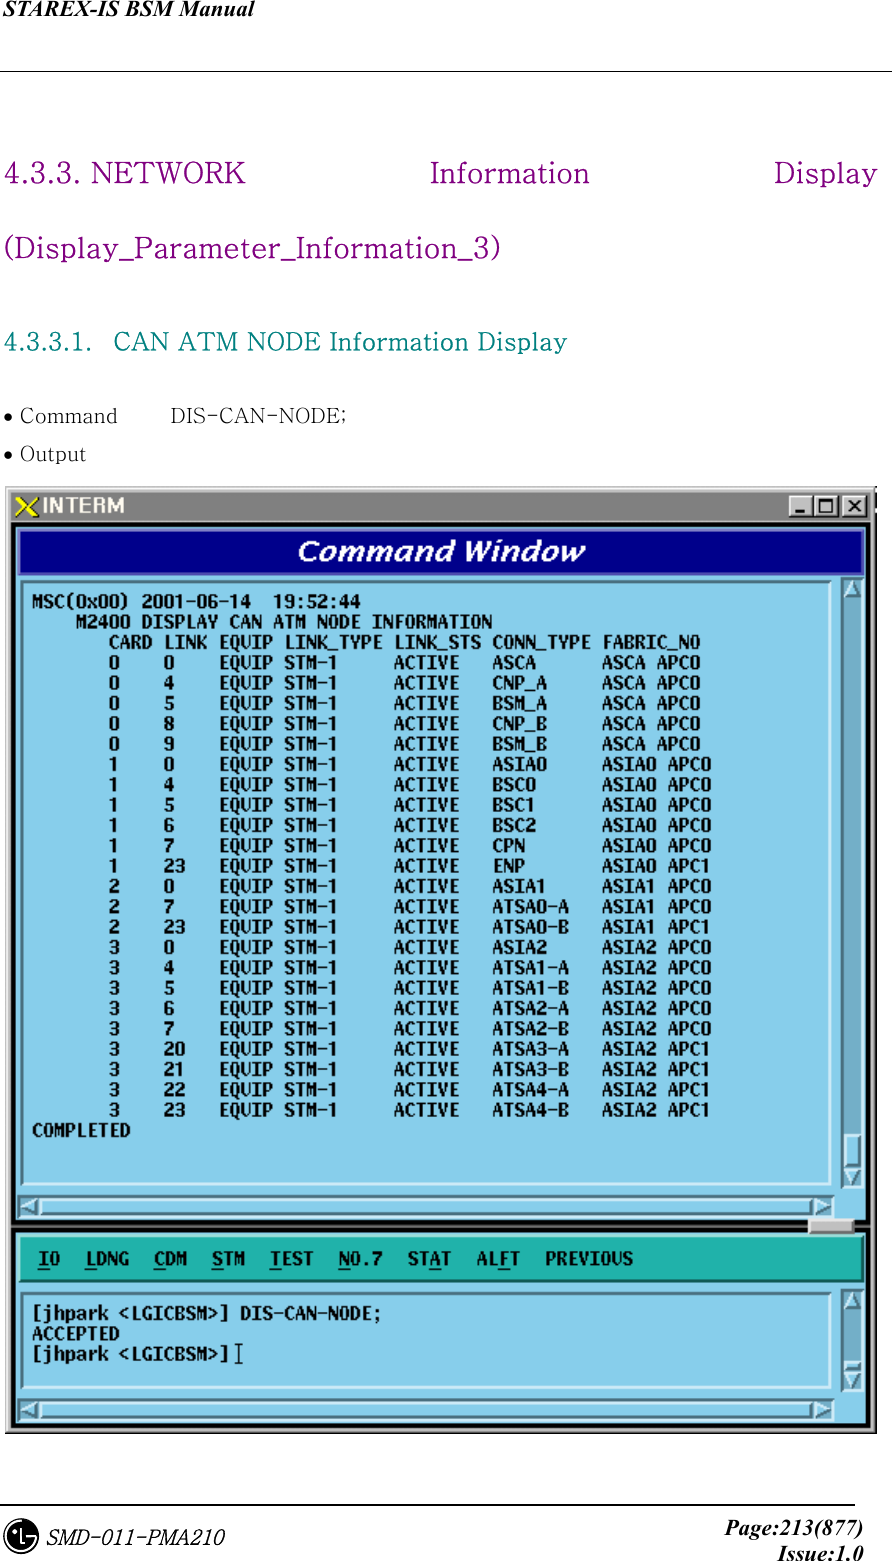 STAREX-IS BSM Manual     Page:213(877)Issue:1.0SMD-011-PMA210  4.3.3. NETWORK  Information  Display (Display_Parameter_Information_3)  4.3.3.1.   CAN ATM NODE Information Display  • Command     DIS-CAN-NODE; • Output  